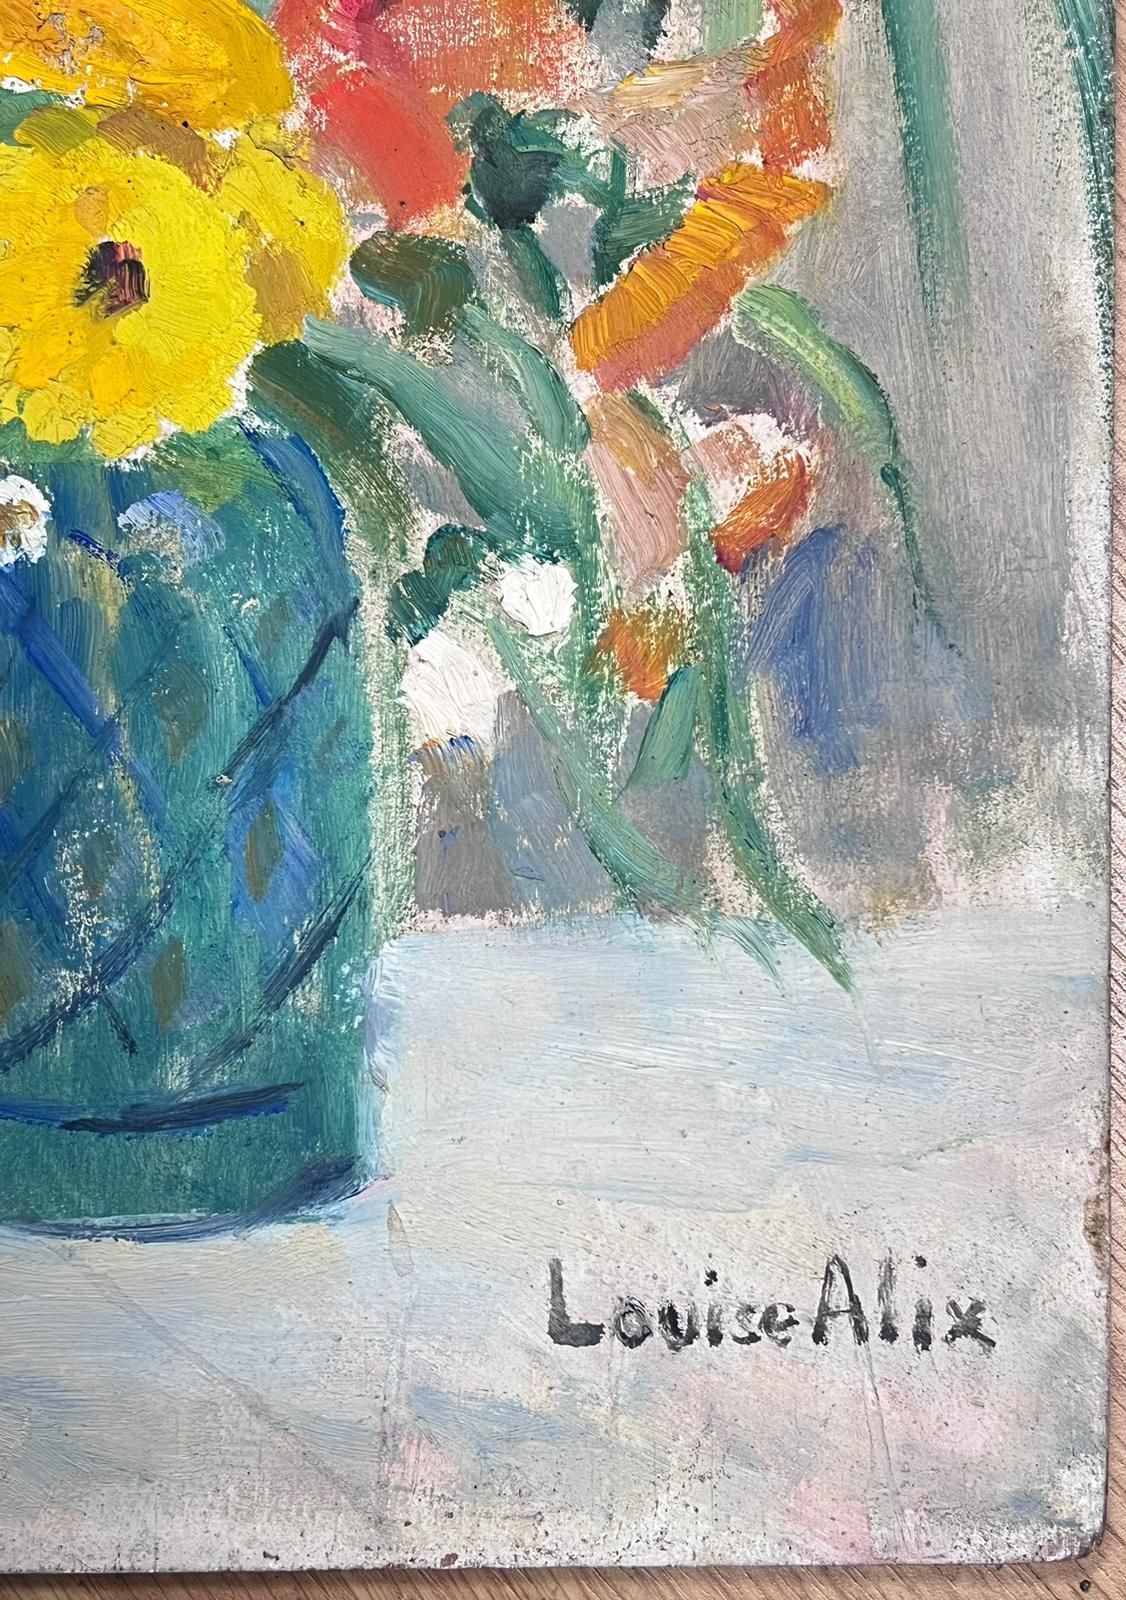 Vintage French Oil Painting 
signed by Louise Alix (French, 1888-1980) *see notes below
provenance stamp to the back 
oil painting on board, unframed
measures: 13.5 high by 10.5 inches wide
condition: overall very good and sound, a few scuffs and